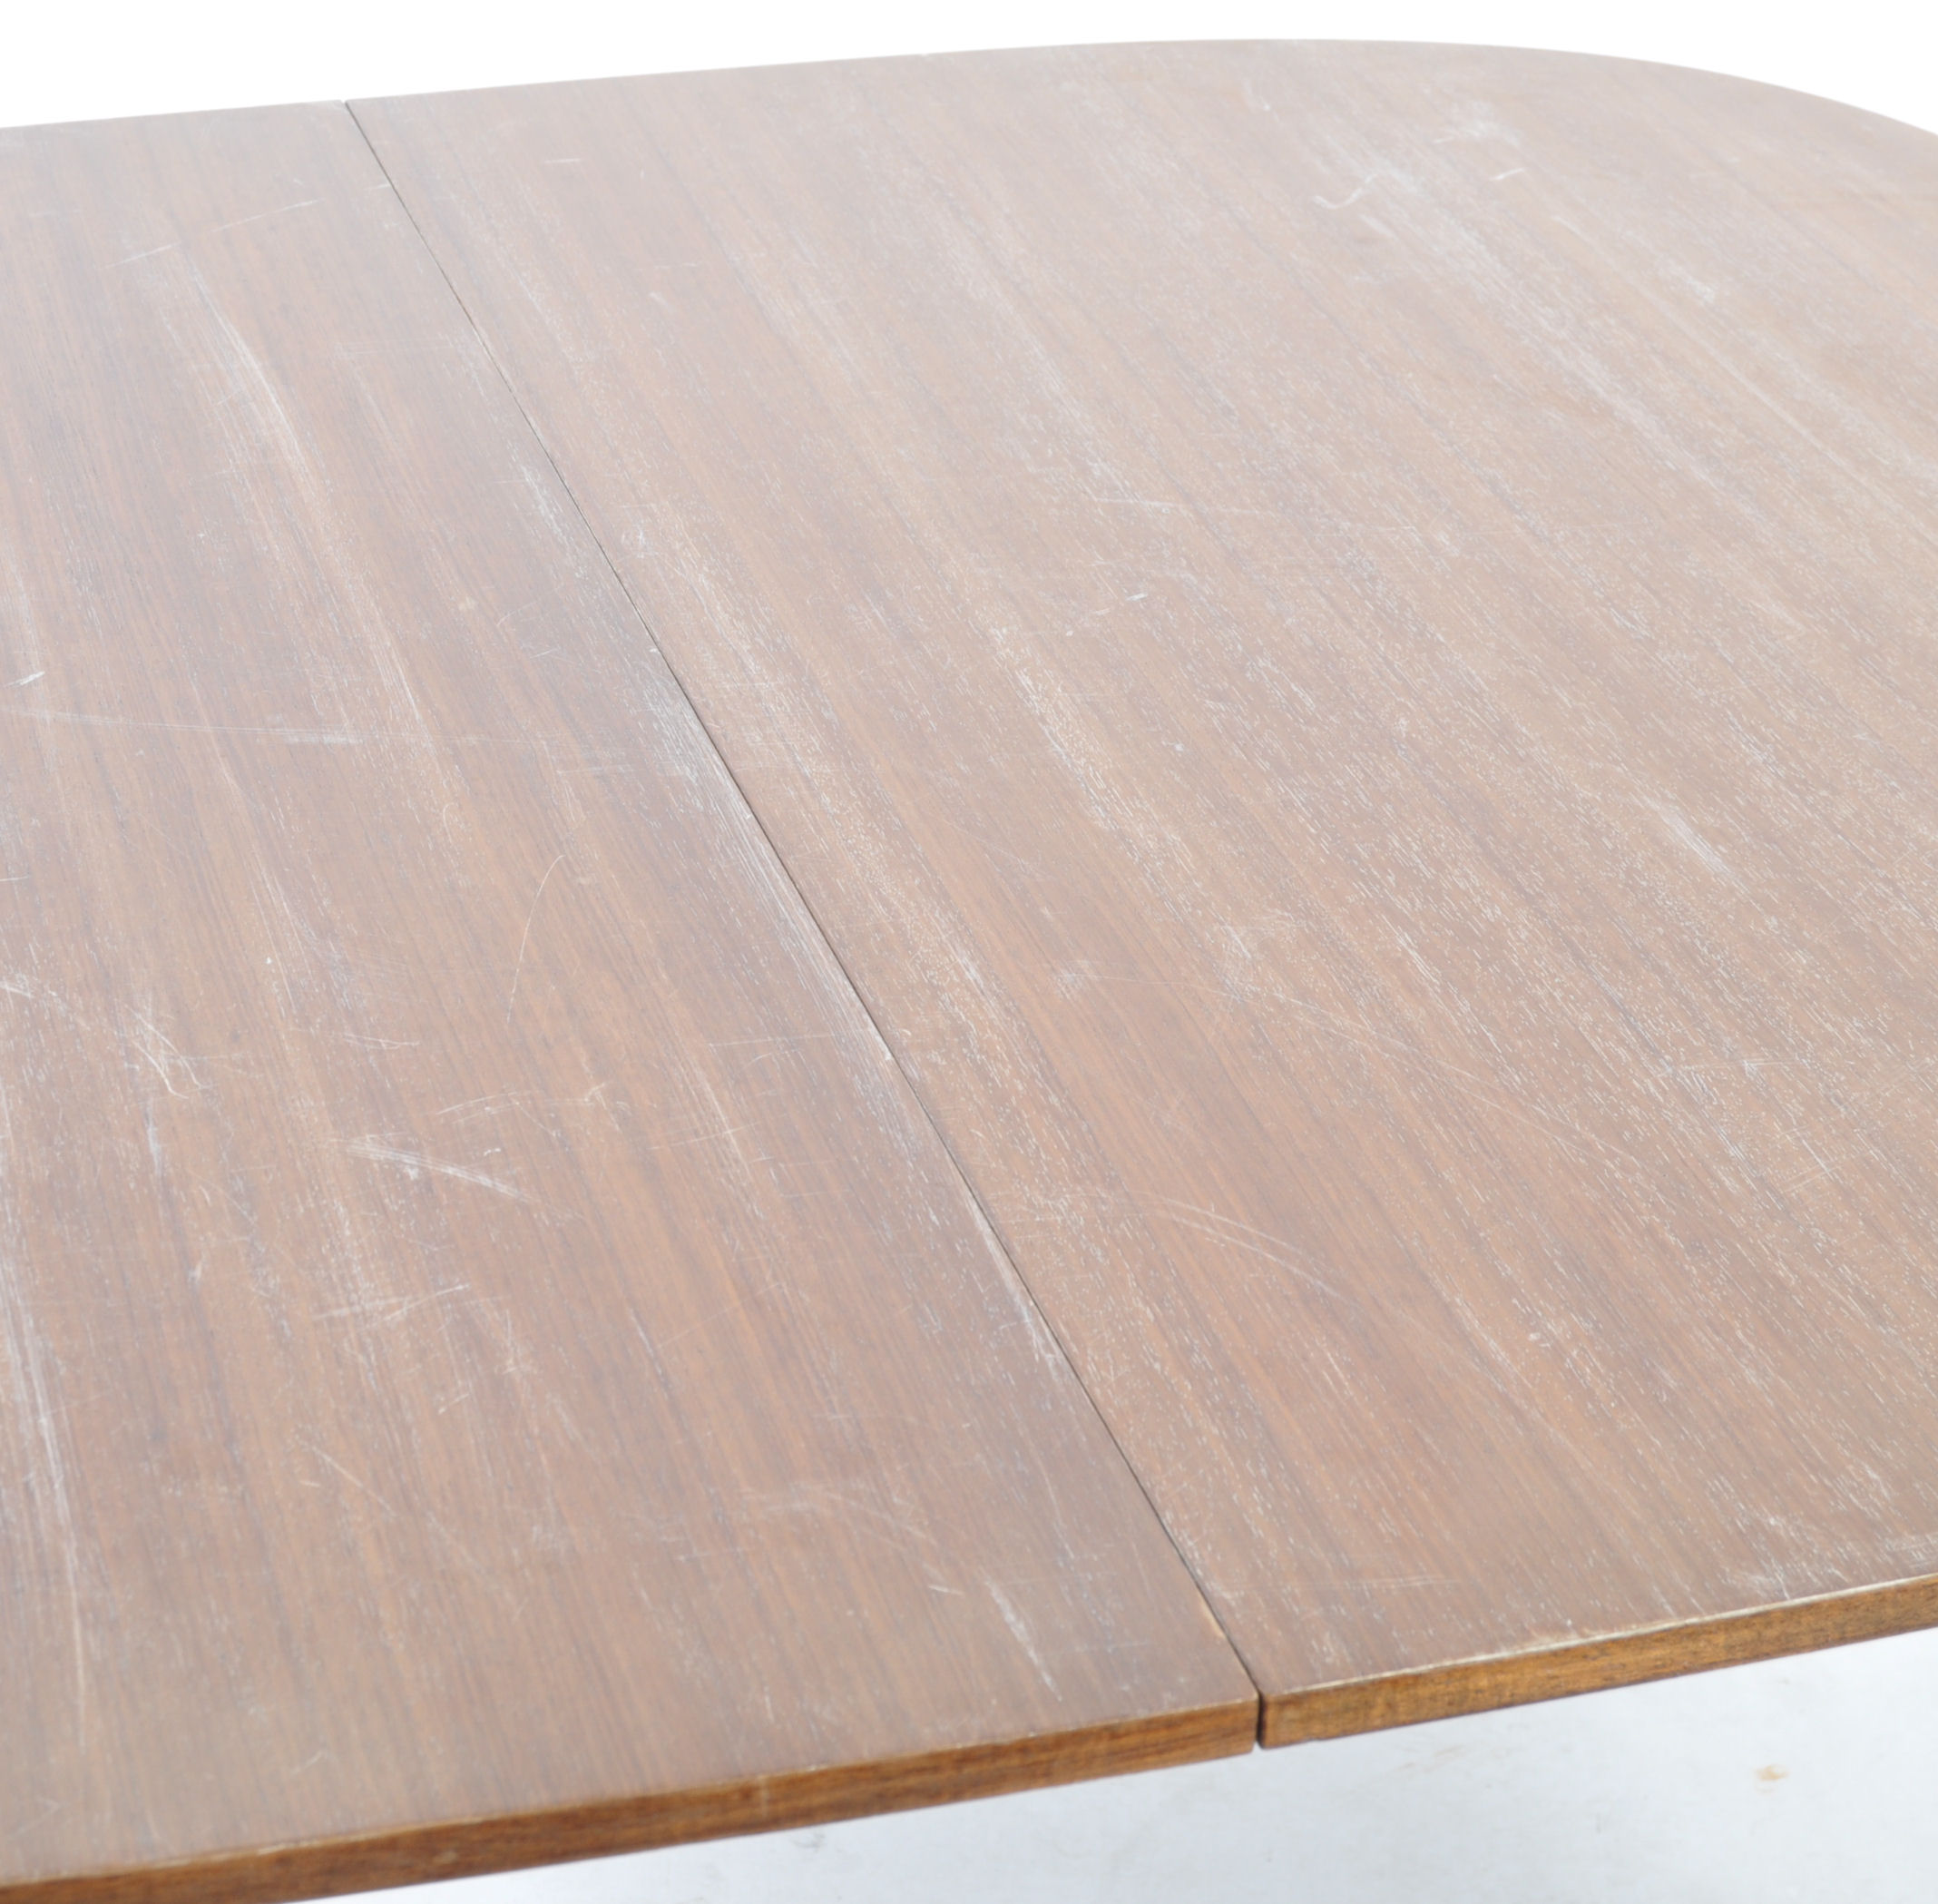 ERNEST GOMME FOR G-PLAN LIBRENZA PATTERN DINING TABLE - Image 3 of 5